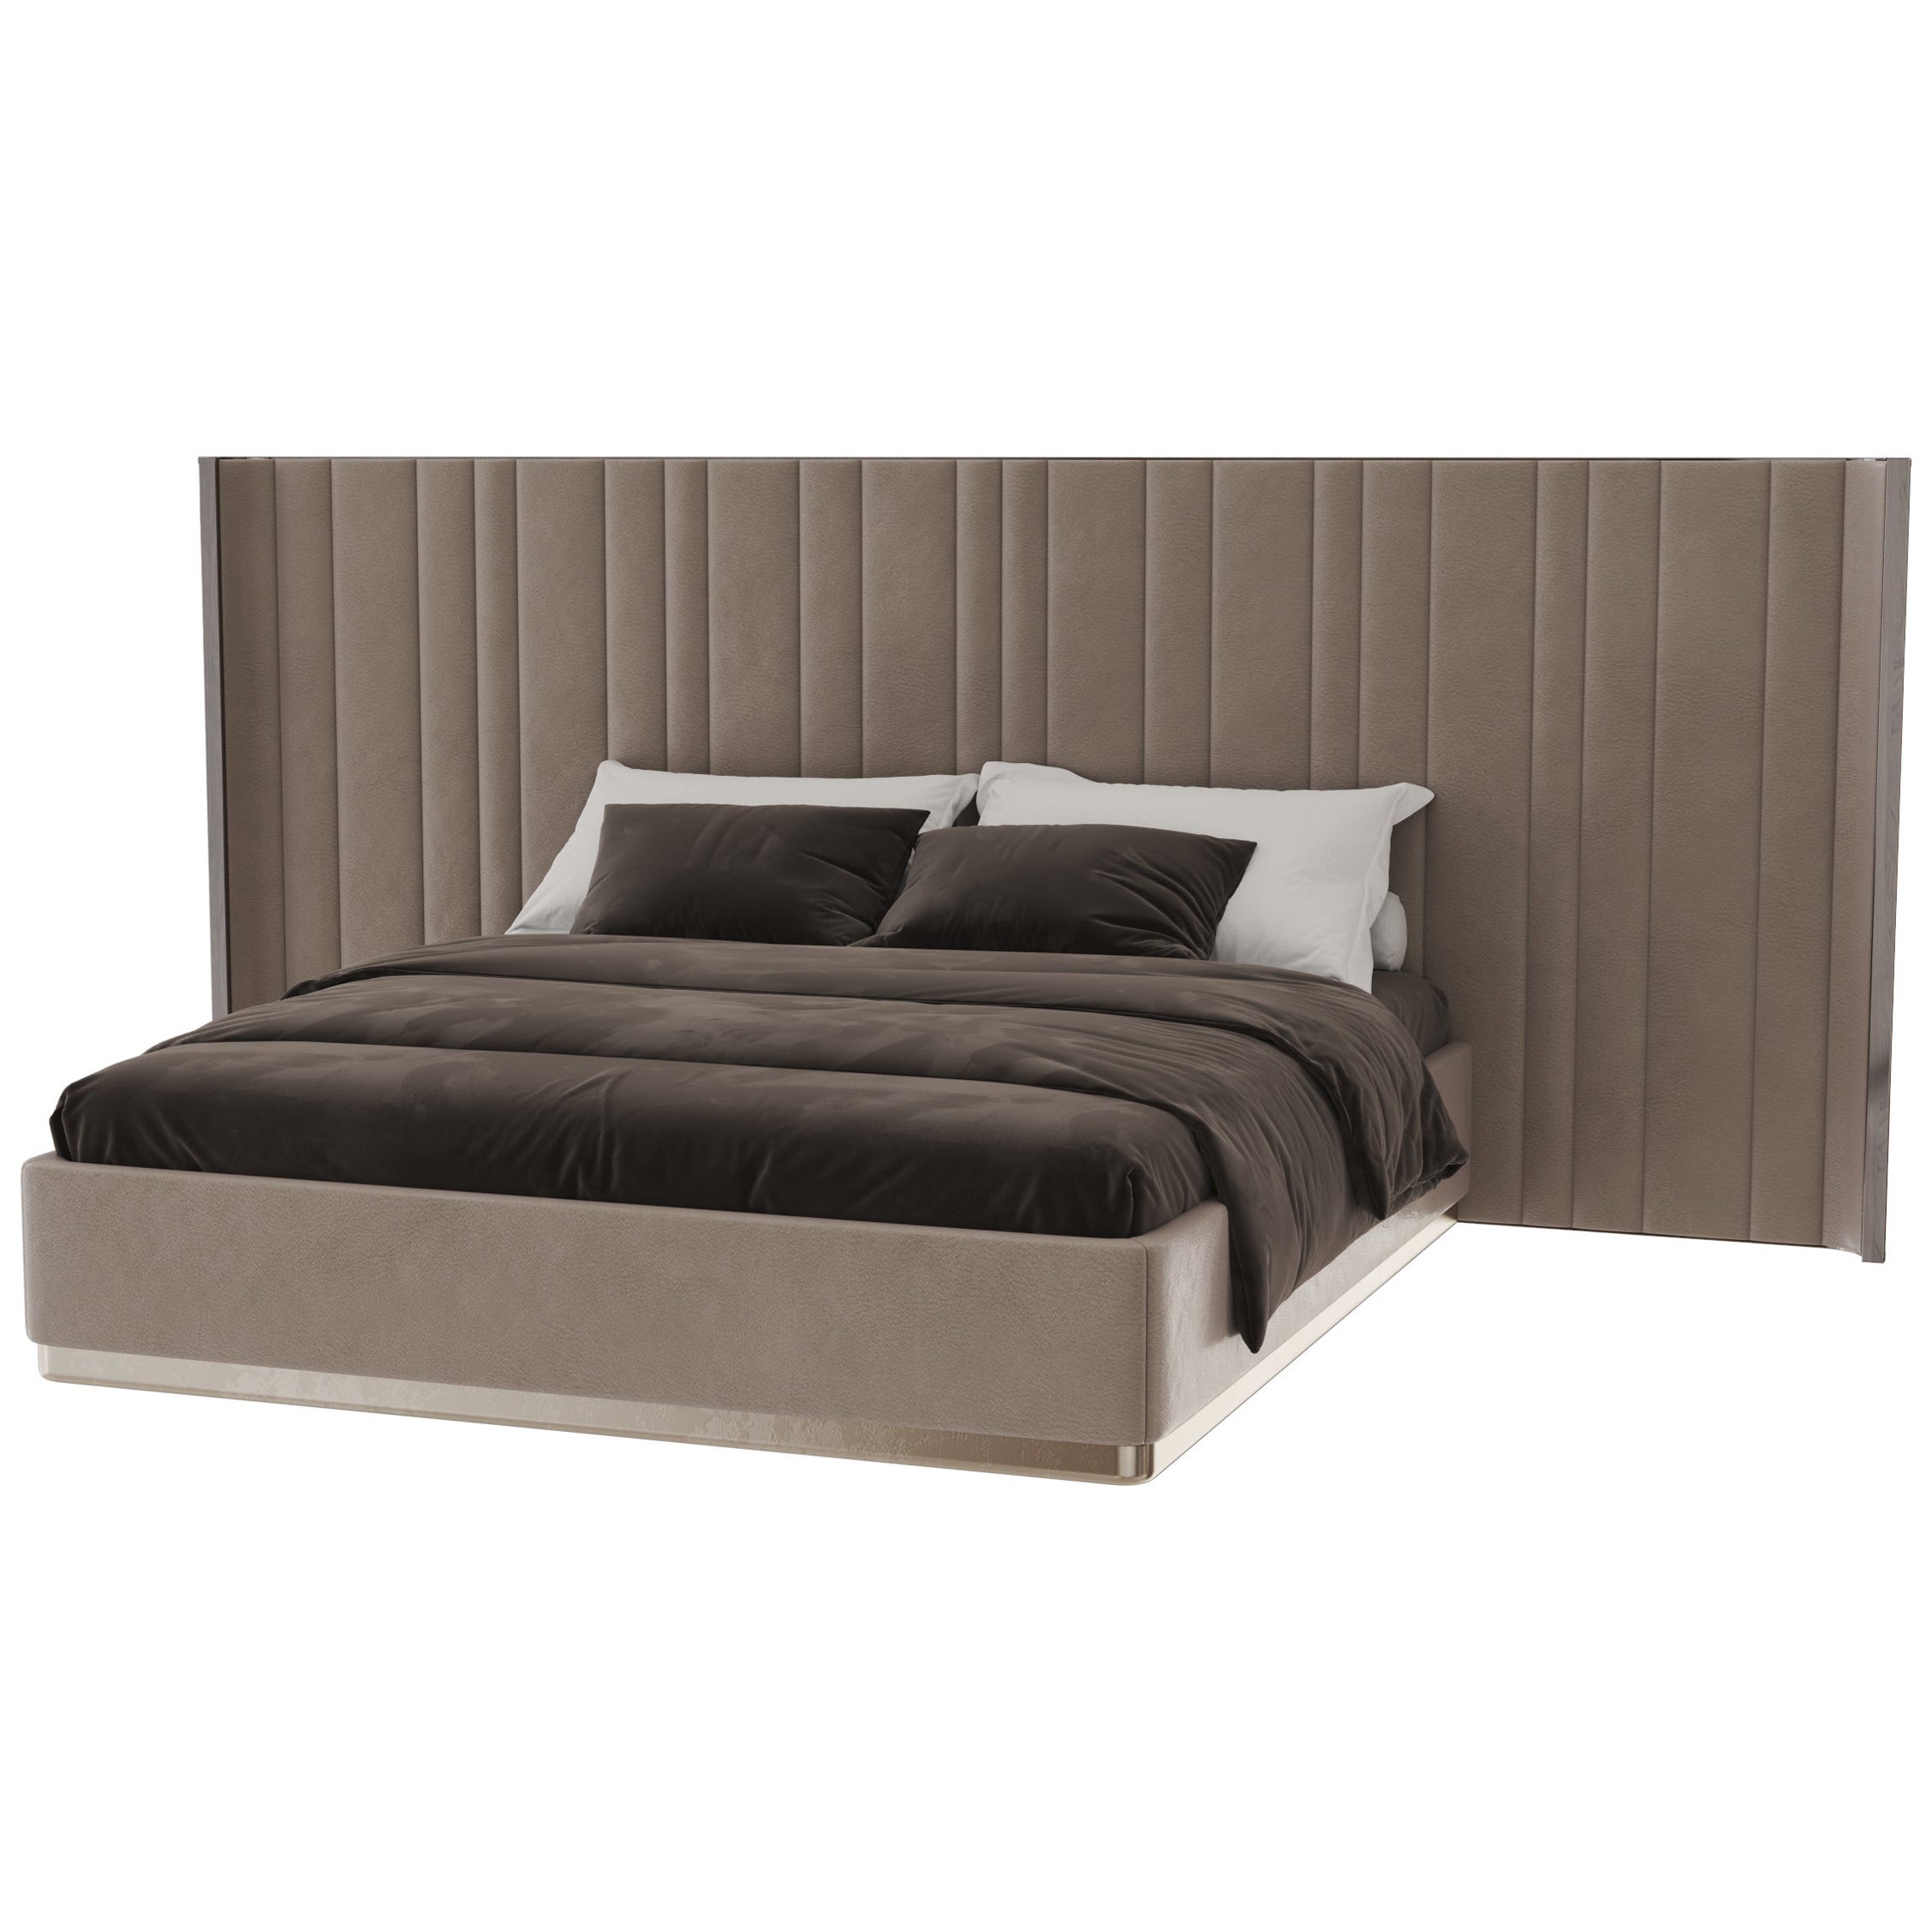 Saga 140 XL Italian Curved Bed in Nabuck Leather For Sale